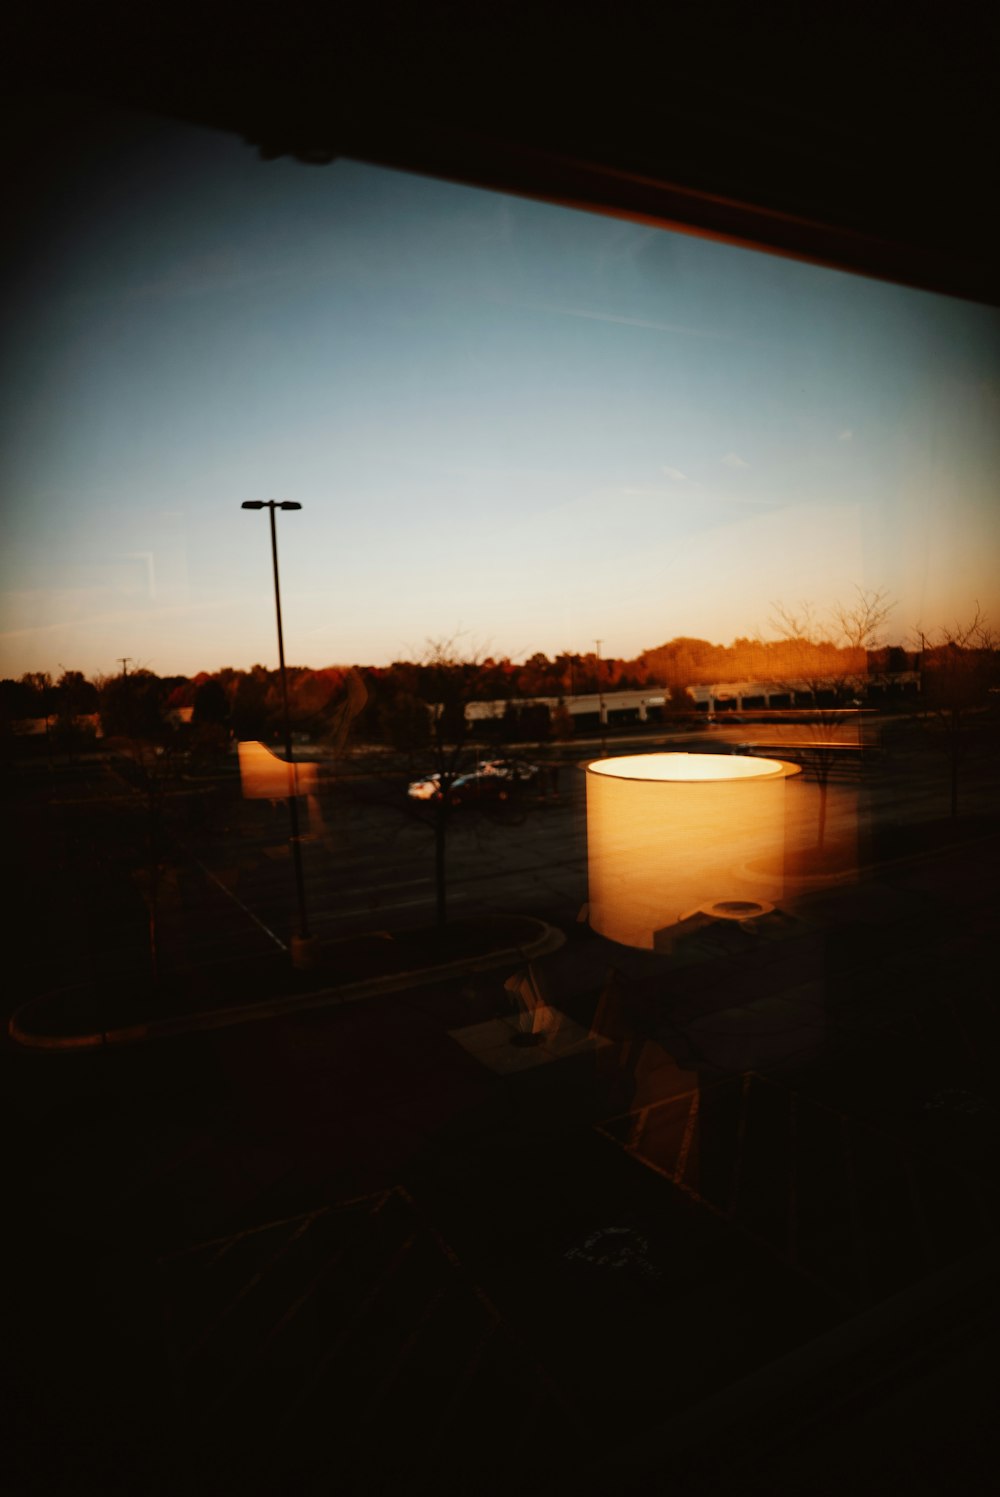 a view of a parking lot through a window